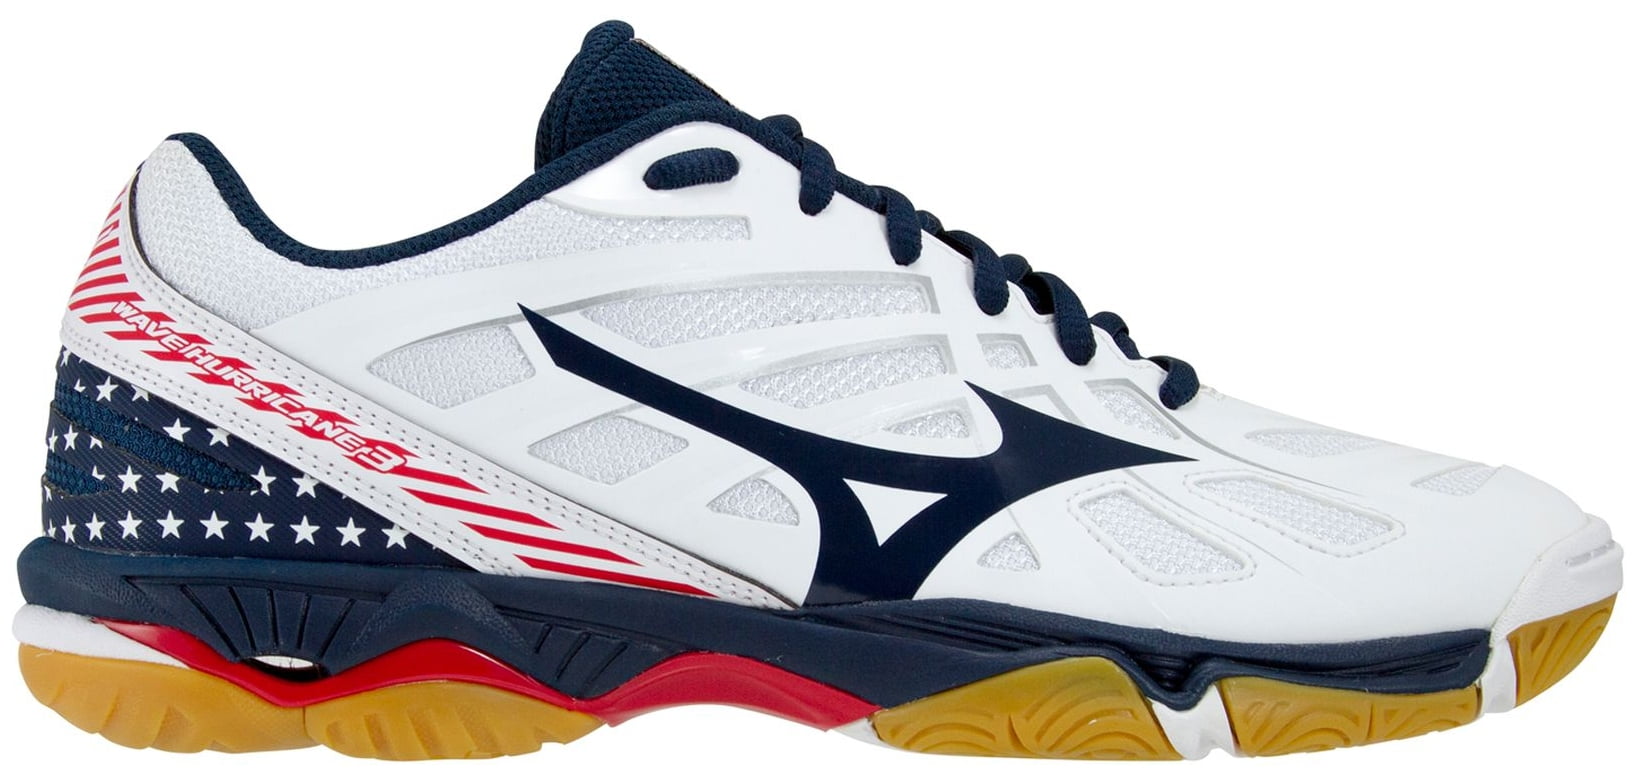 Wave Hurricane 3 Volleyball Shoes 